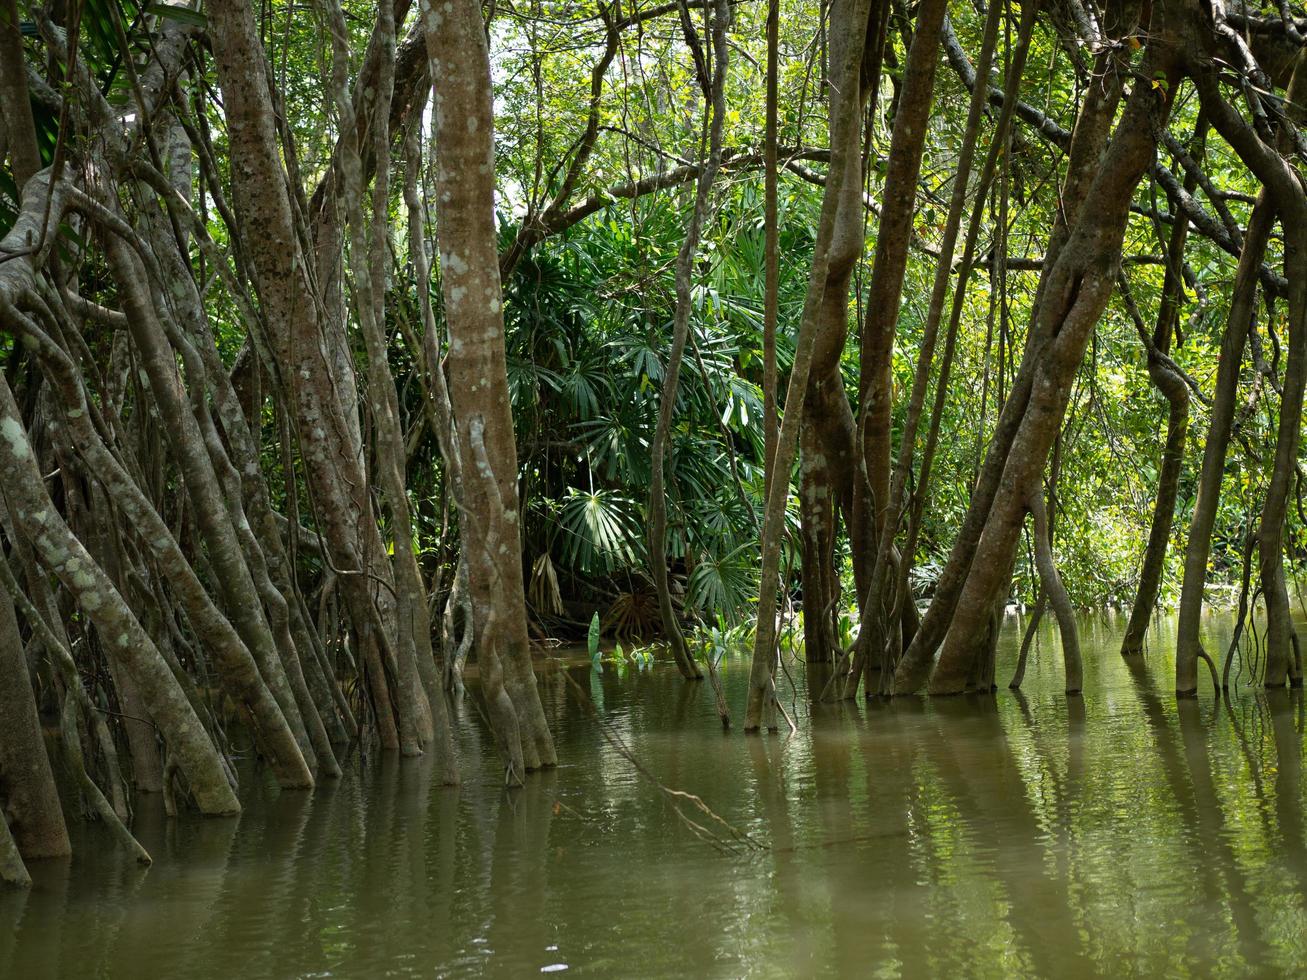 old banyan tree roots In the Little Amazon or Khlong Sang Naen, Phang Nga, Thailand, a famous tourist destination. photo